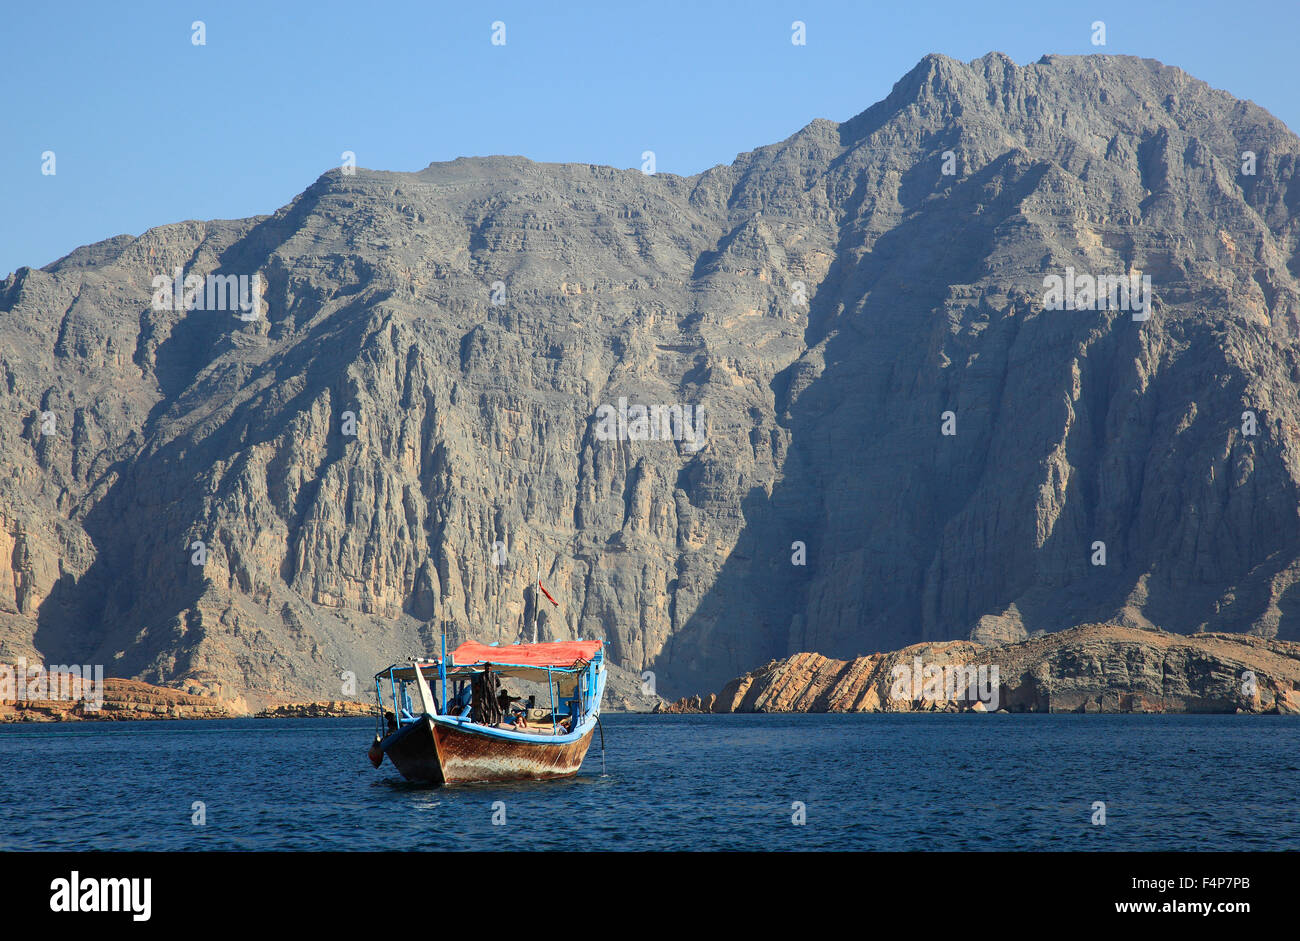 Dhau in the bays of Musandam, Shimm strait, in the granny's niches enclave of Musandam, Oman Stock Photo